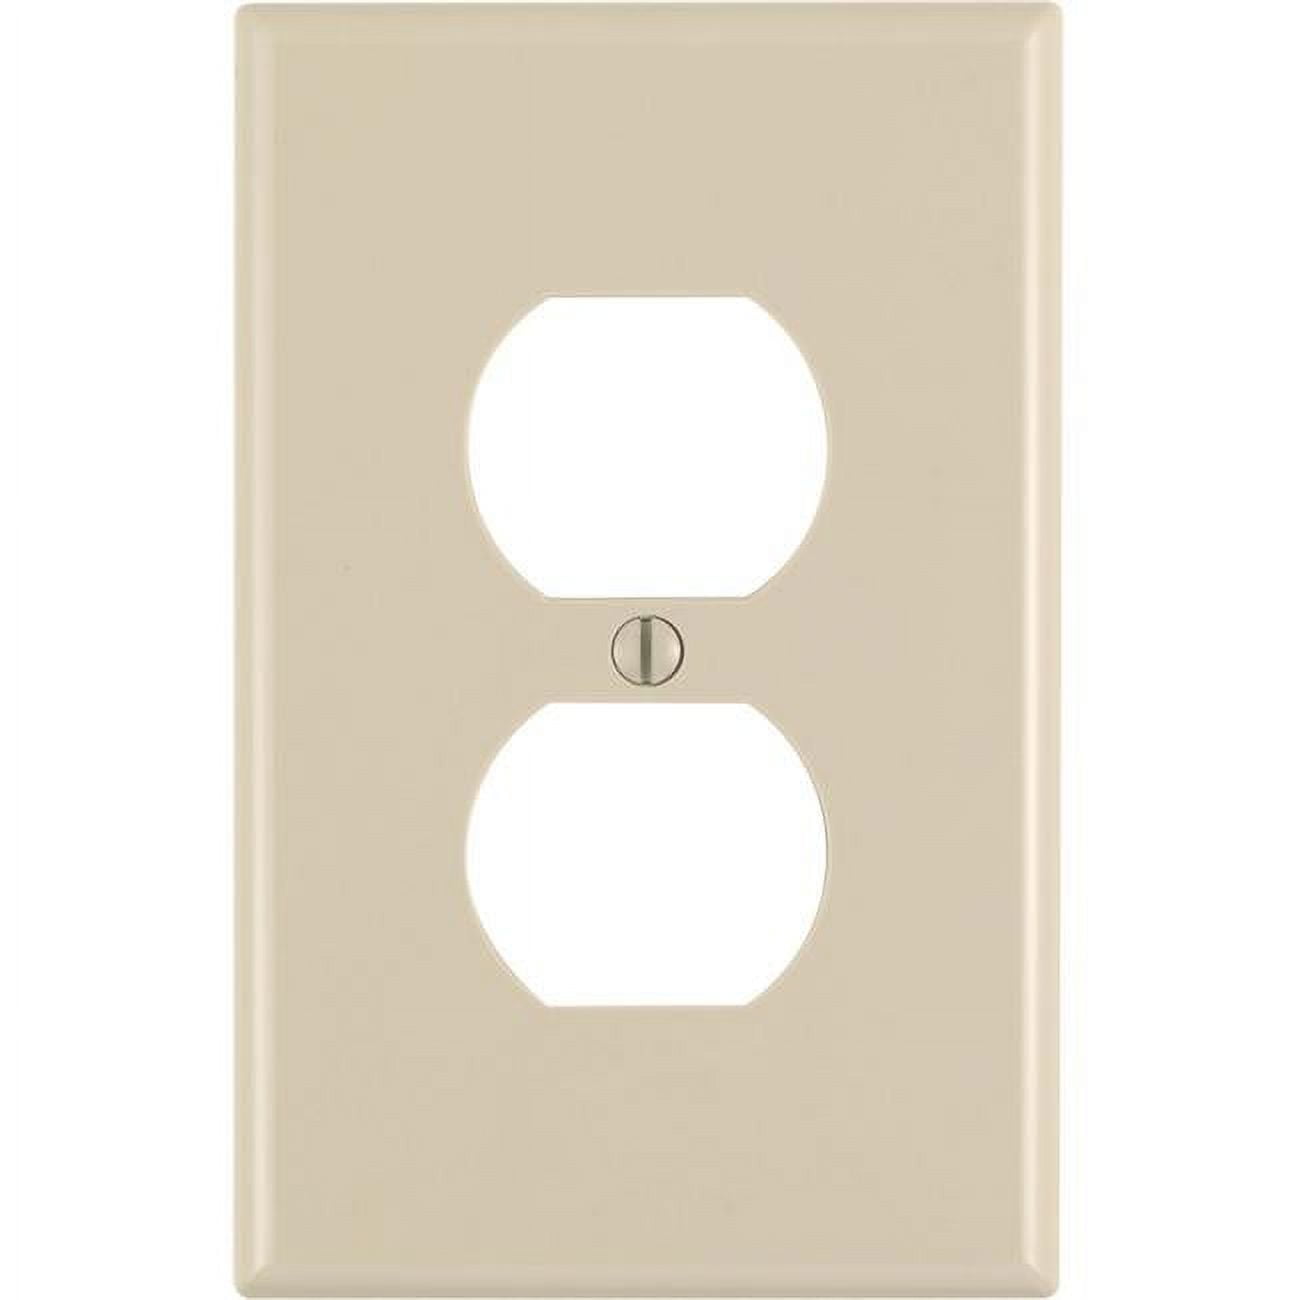 00pj8-00i 1-gang Duplex Device Receptacle Wall Plate Ivory- Pack Of 20